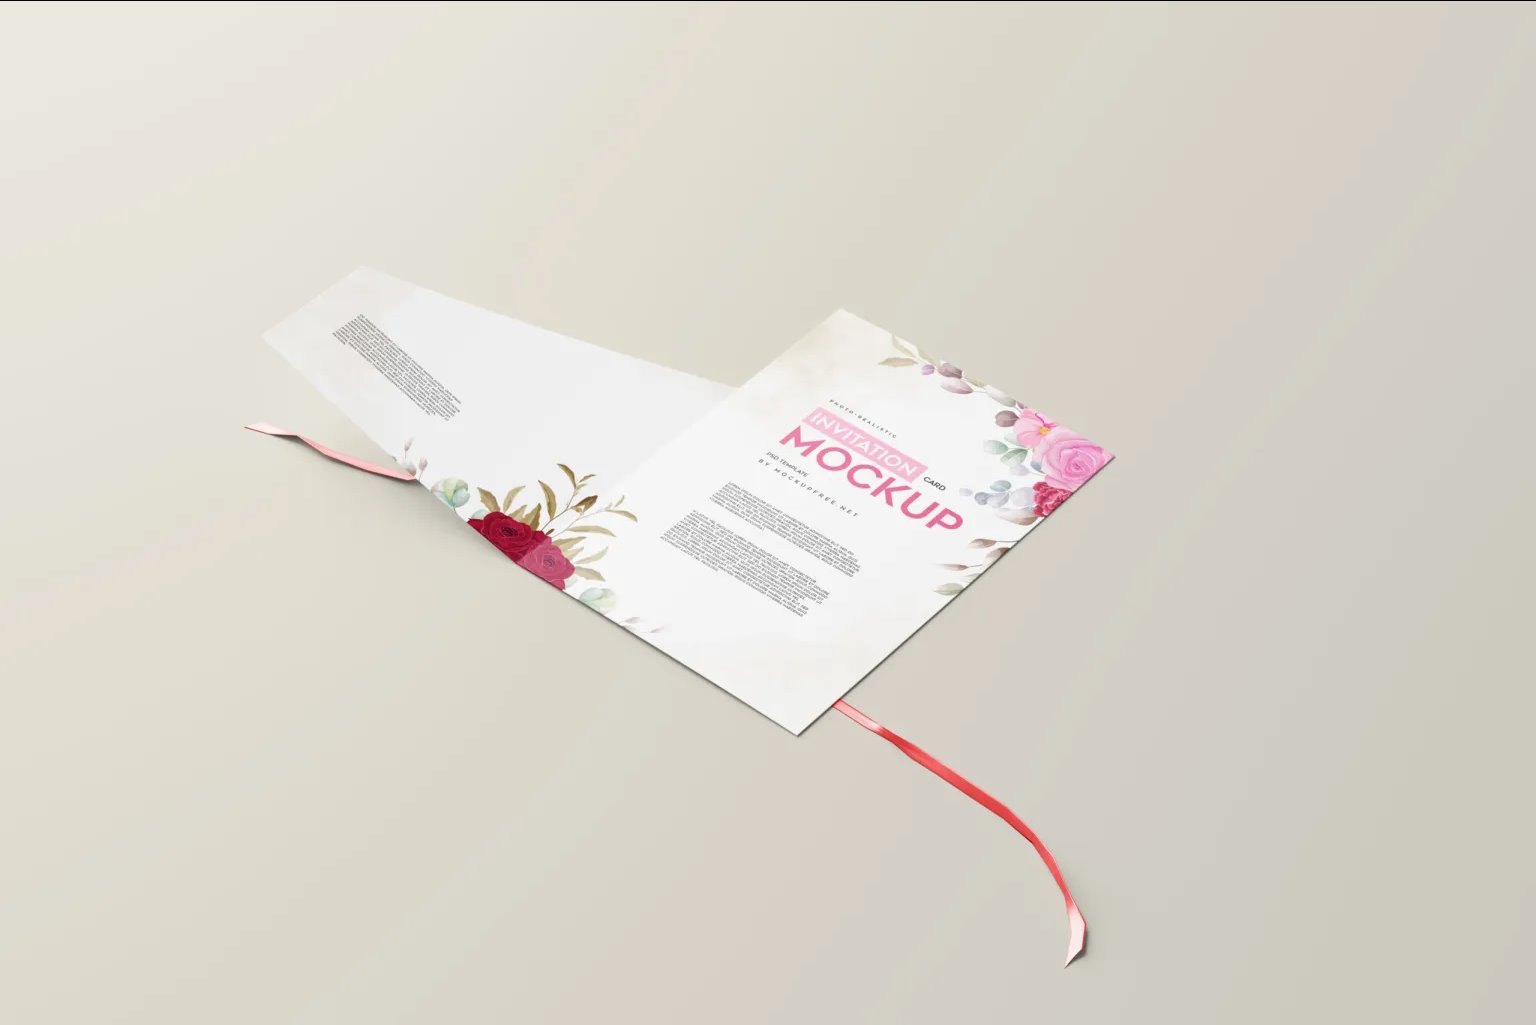 5 Invitation Card Mockups in Different Visions FREE PSD